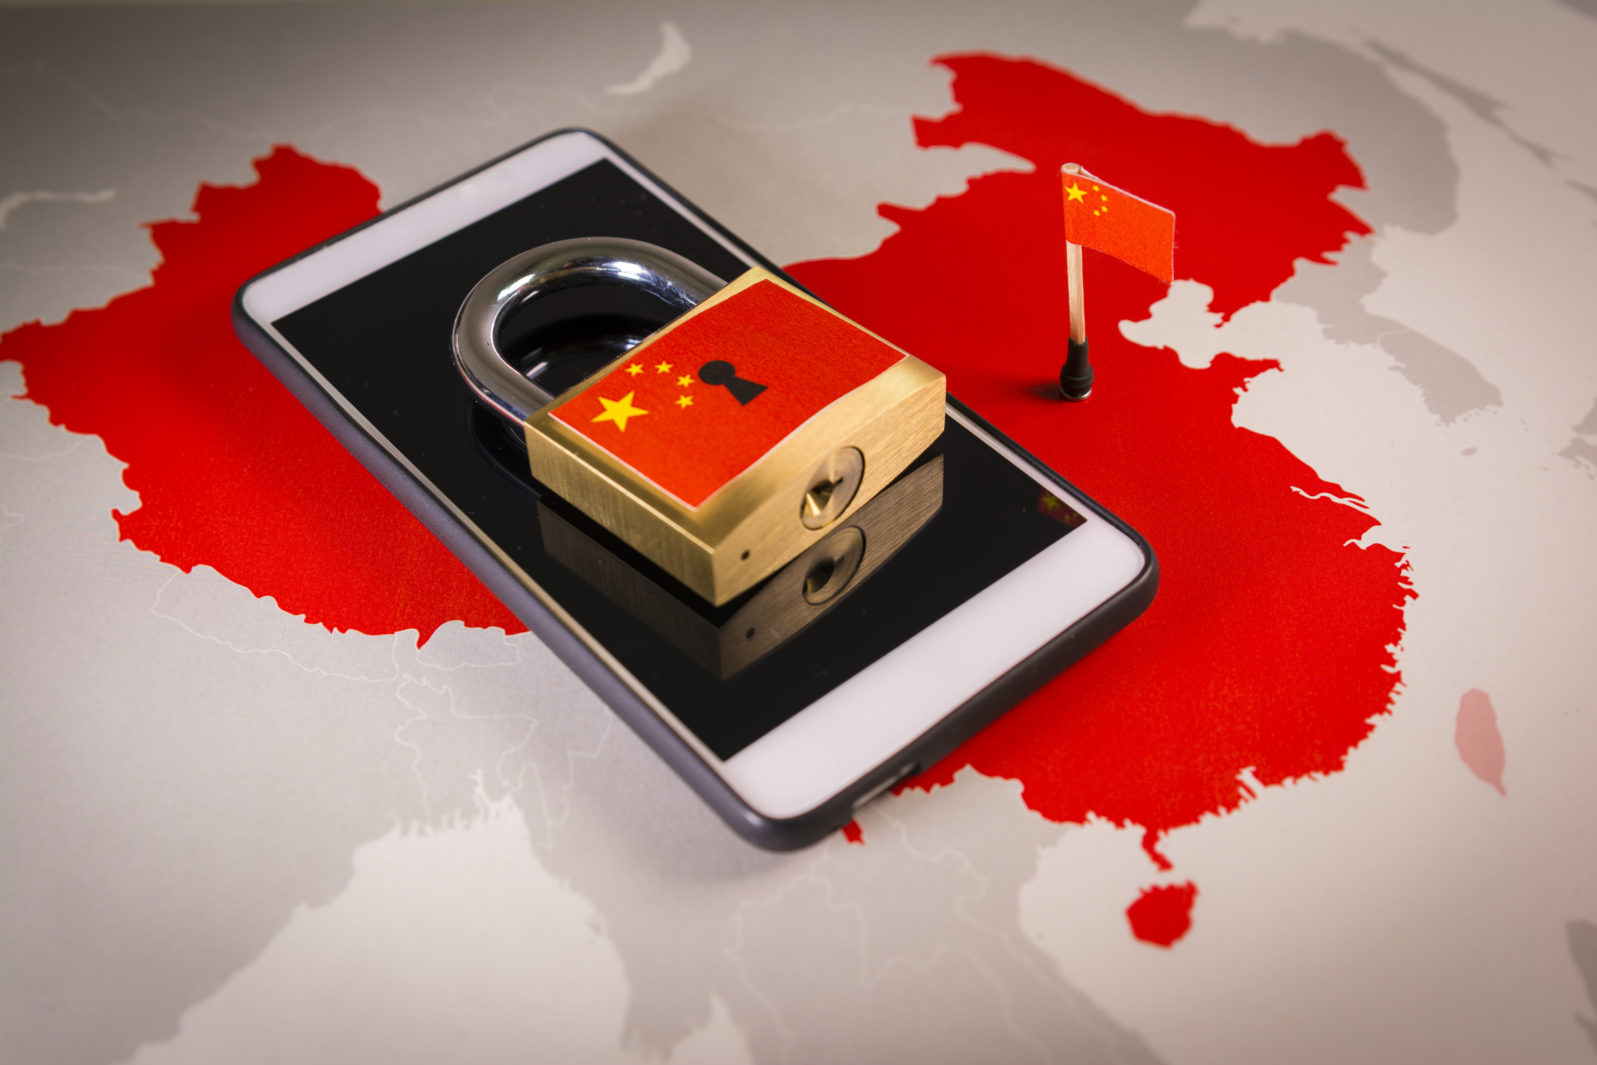 Padlock, China flag on a smartphone and China map, symbolizing the Great Firewall of China concept or GFW and all extreme Internet censorship in China